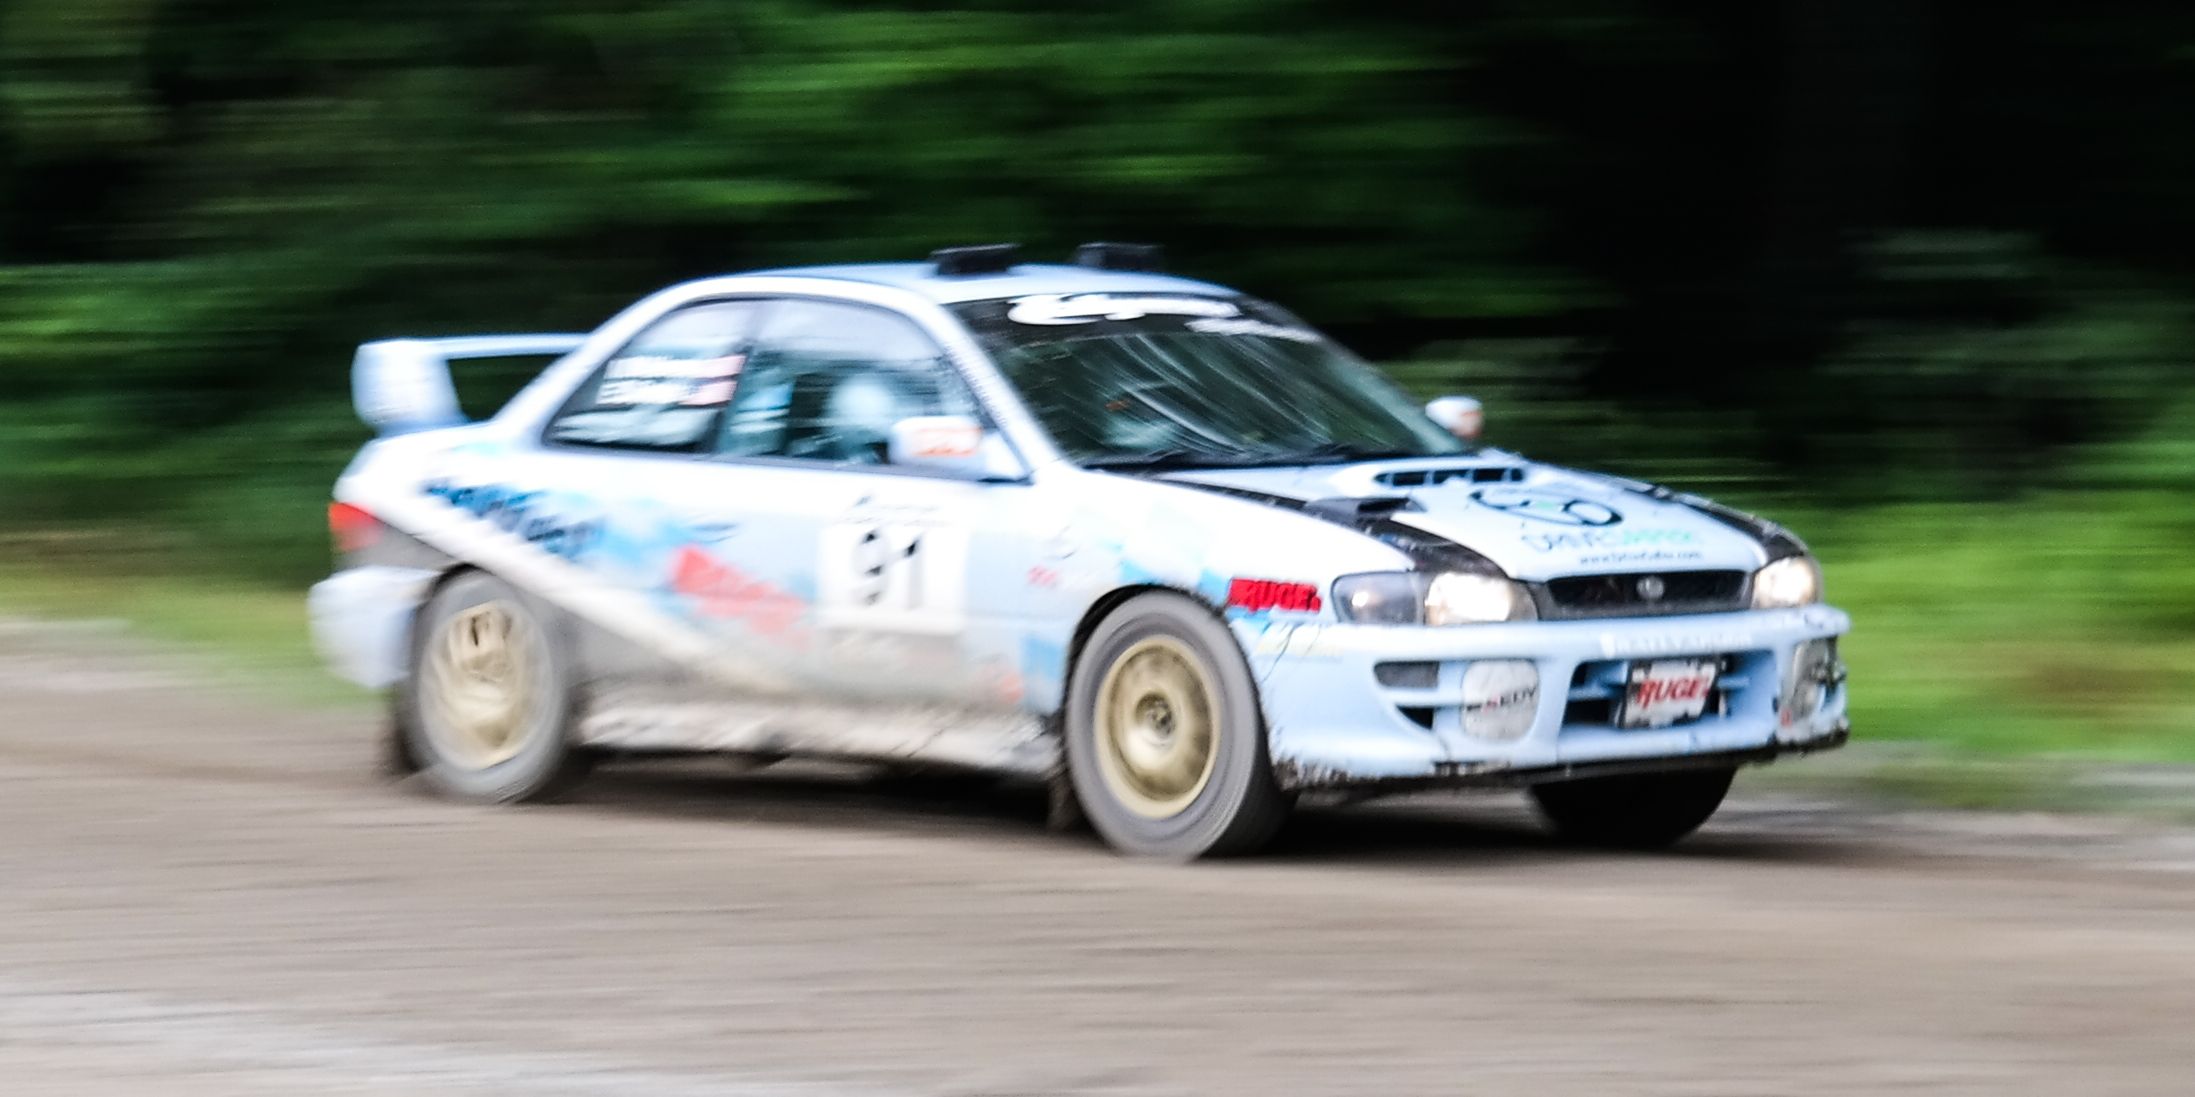 The Best Rally Cars for Beginners in 2023